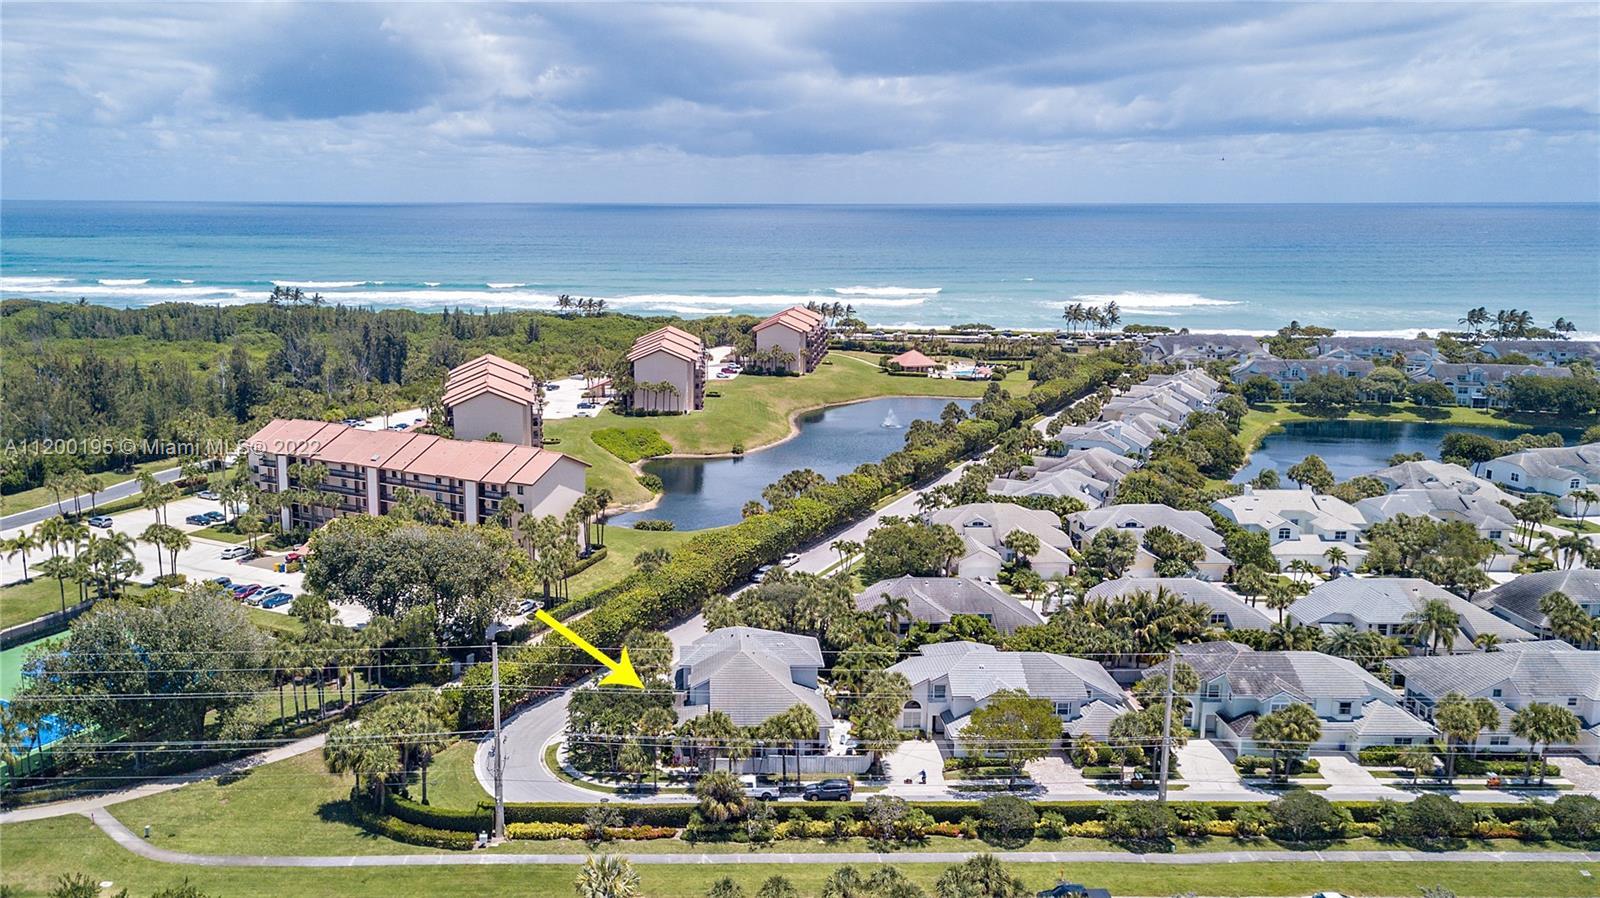 Rarely available TH in this gated sea-side community! Enjoy the ocean breezes and sunrises in this s